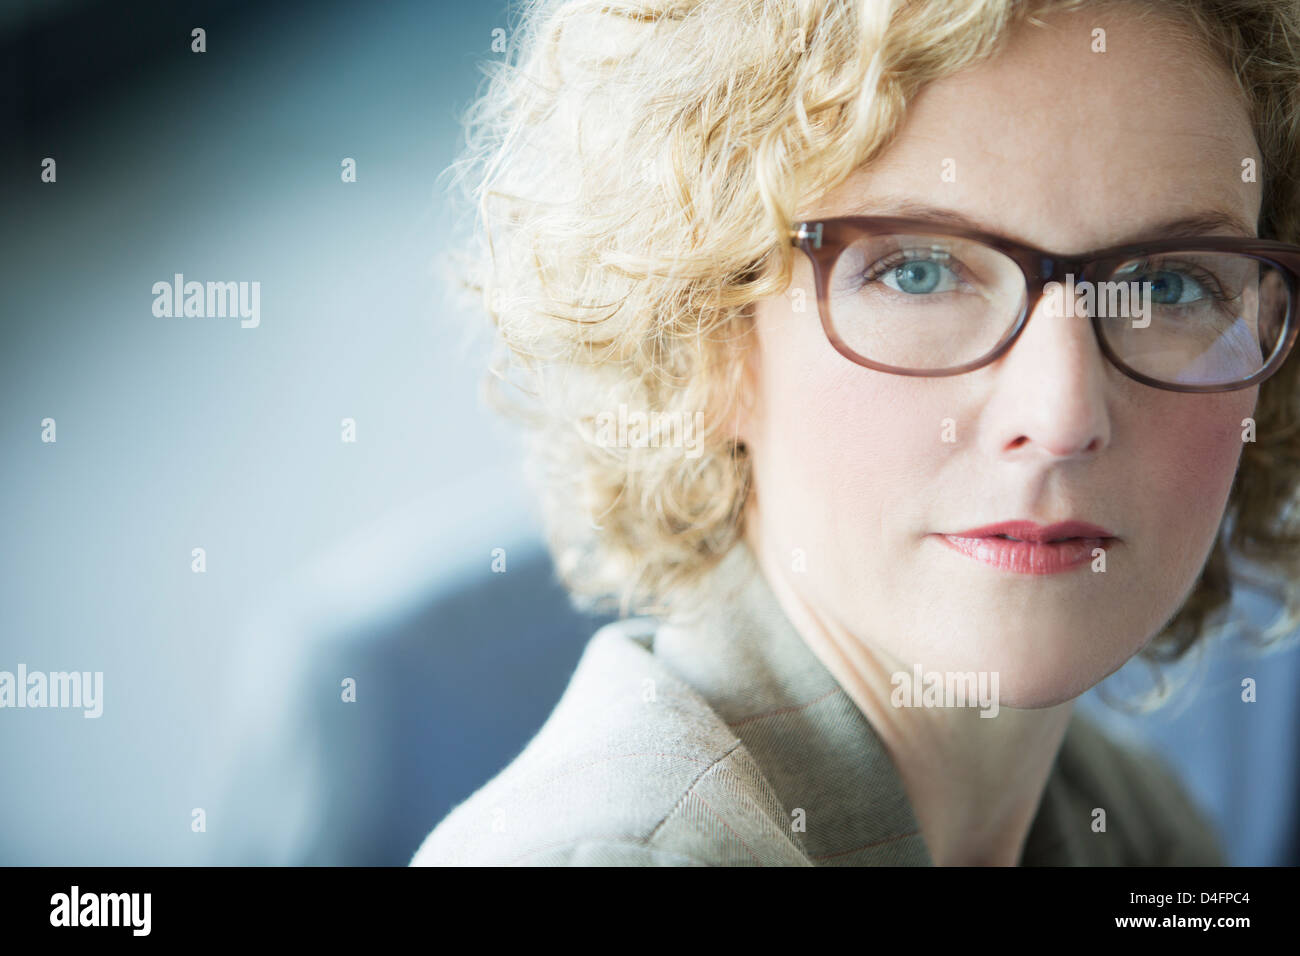 Close up of businesswoman's face Stock Photo